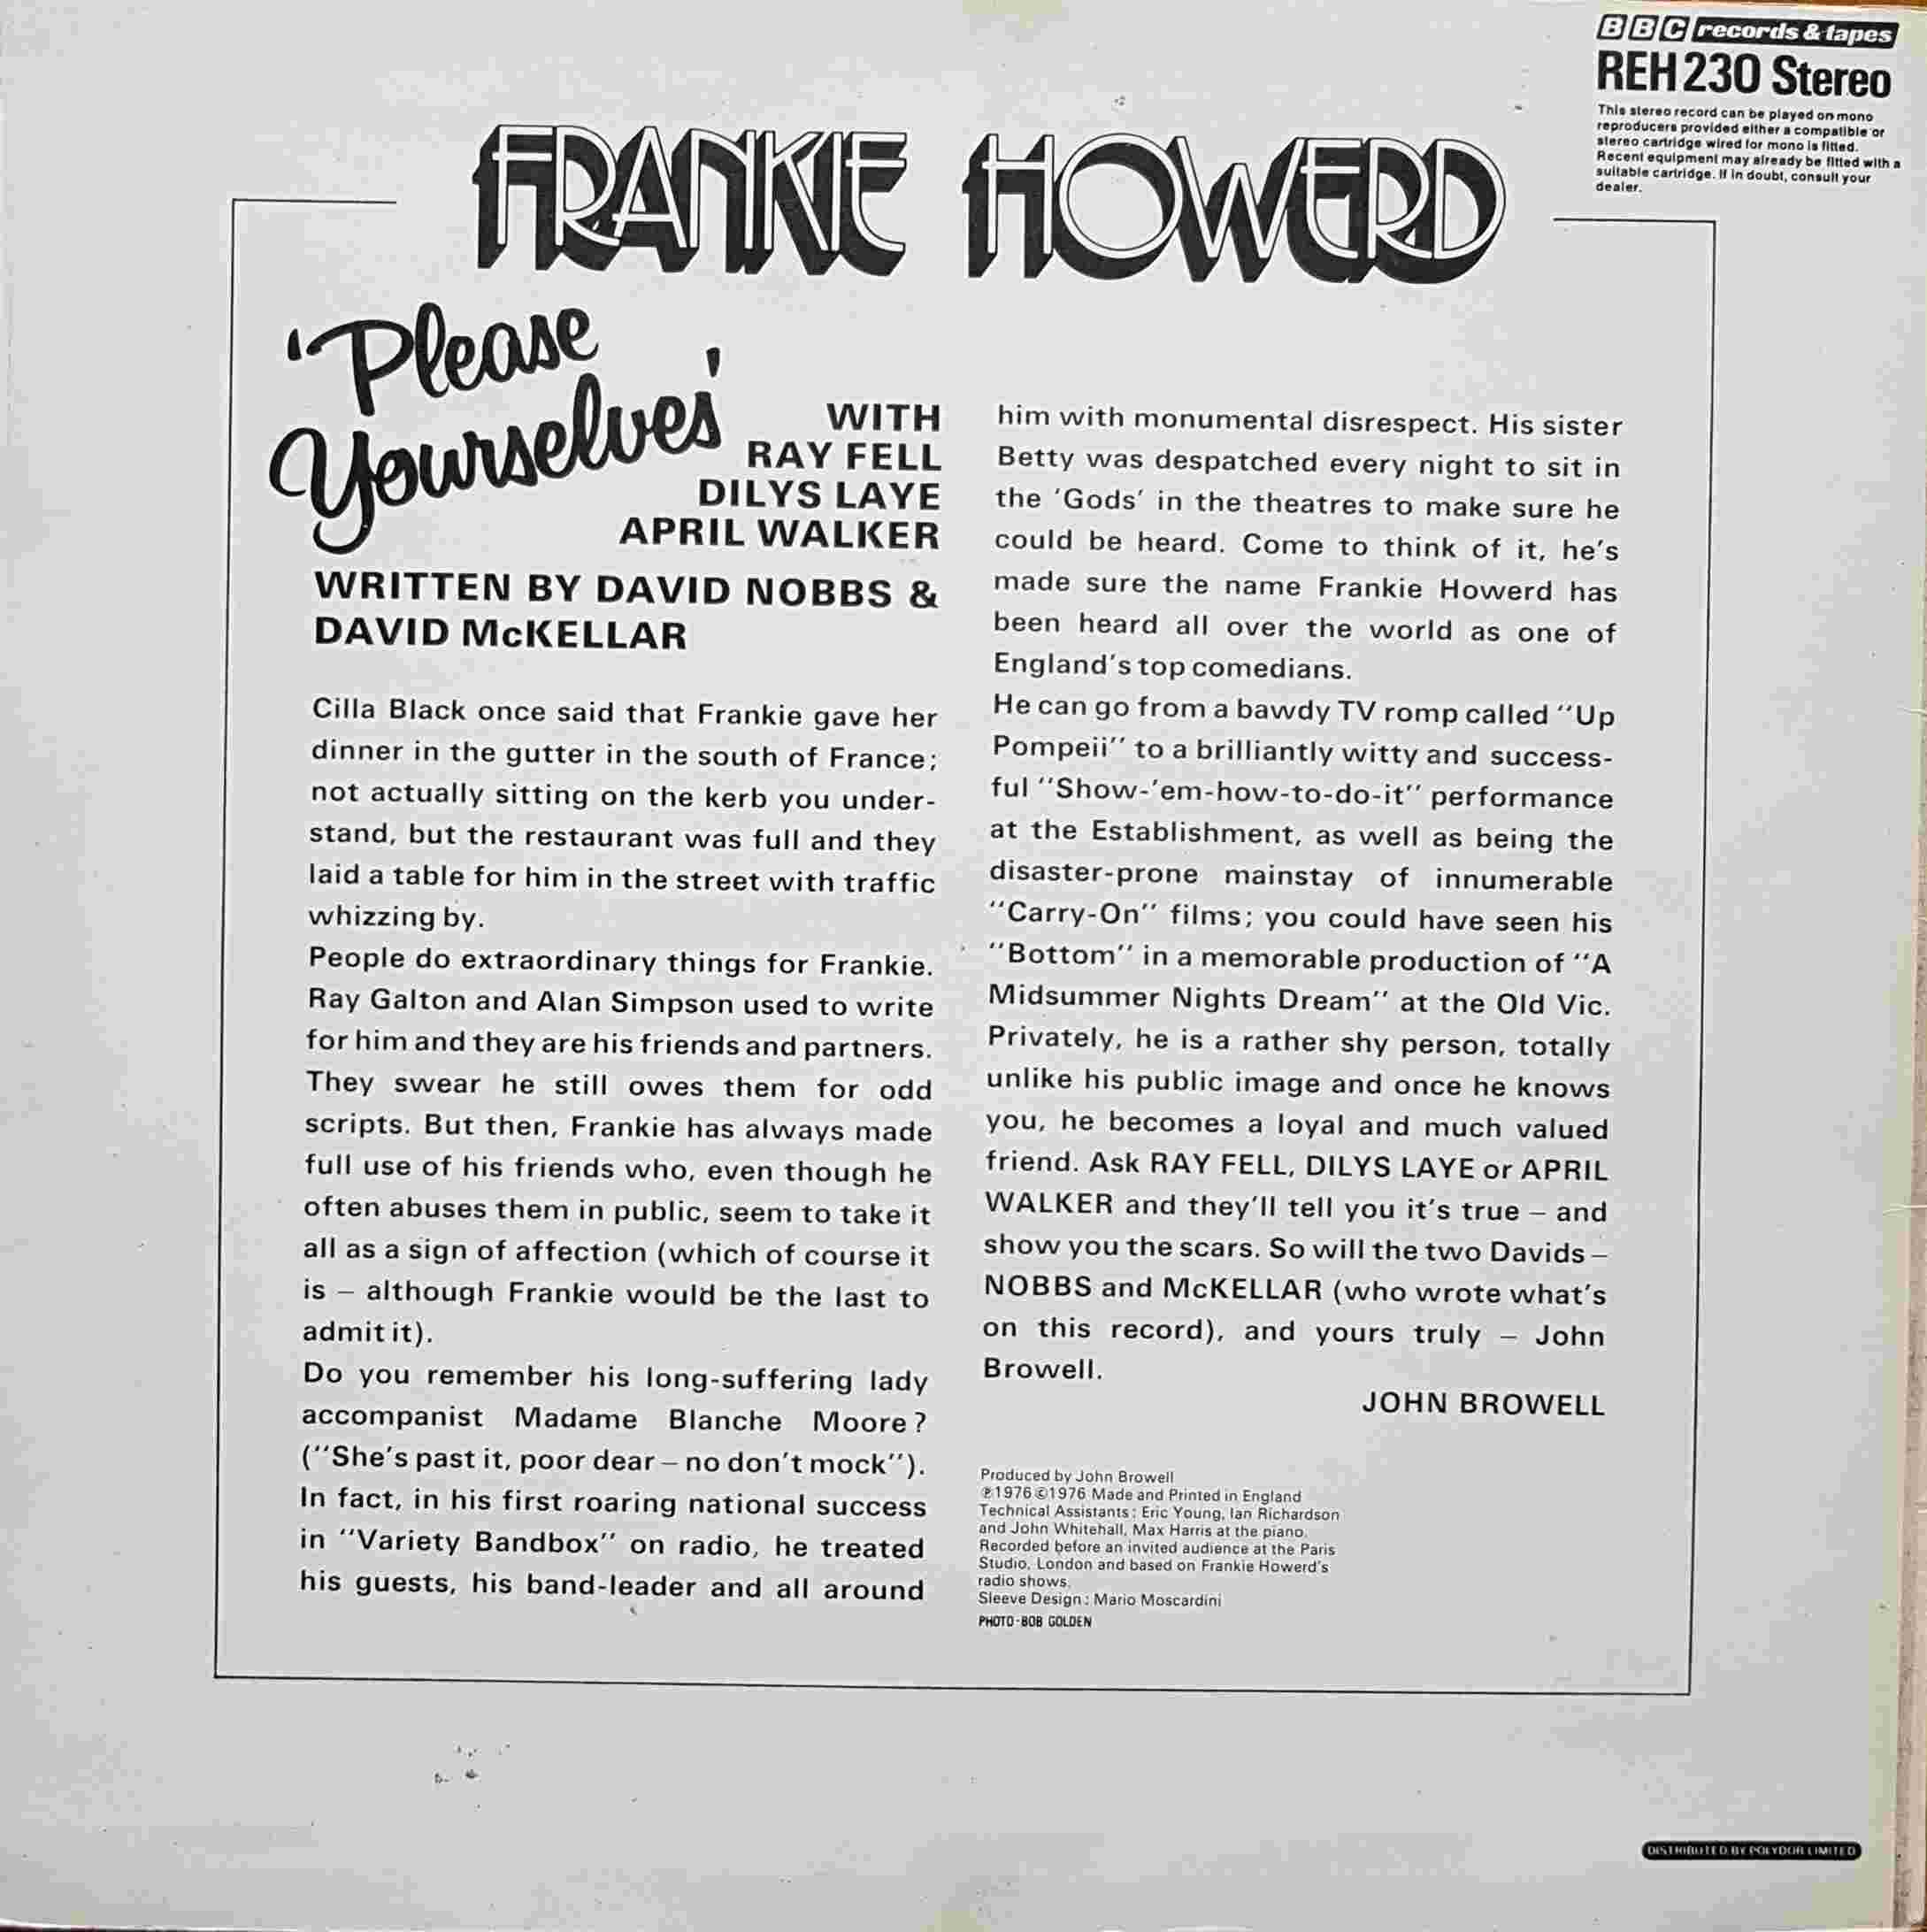 Picture of REH 230 Please yourselves by artist Frankie Howerd from the BBC records and Tapes library